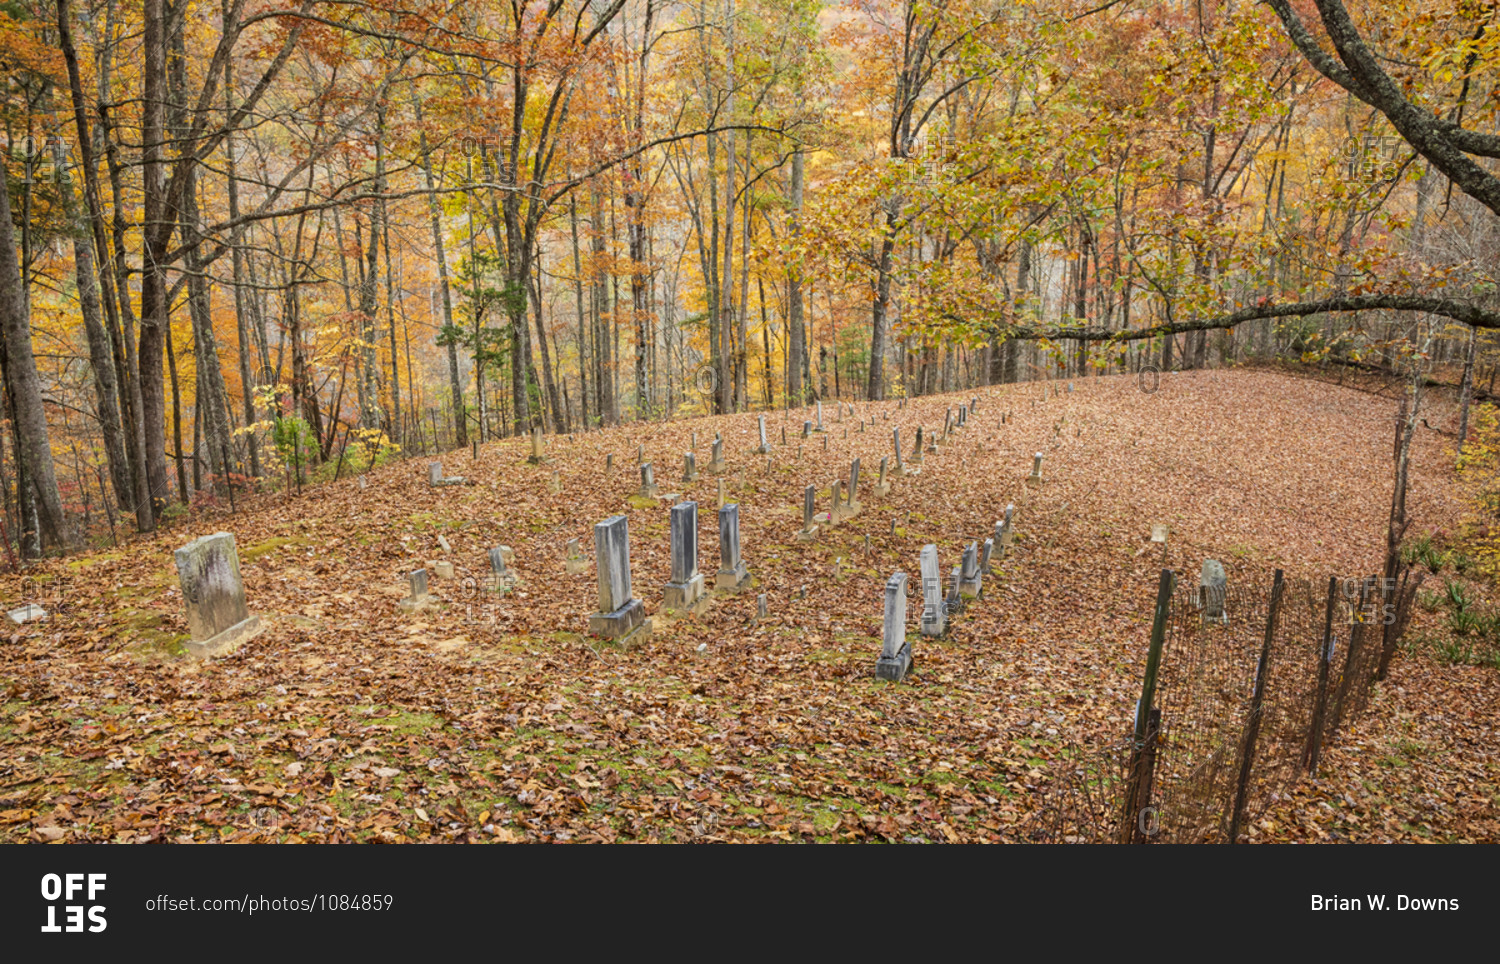 Cemetery in autumn with fallen leaves in the forest, Great Smoky Mountains National Park, Cataloochee, North Carolina